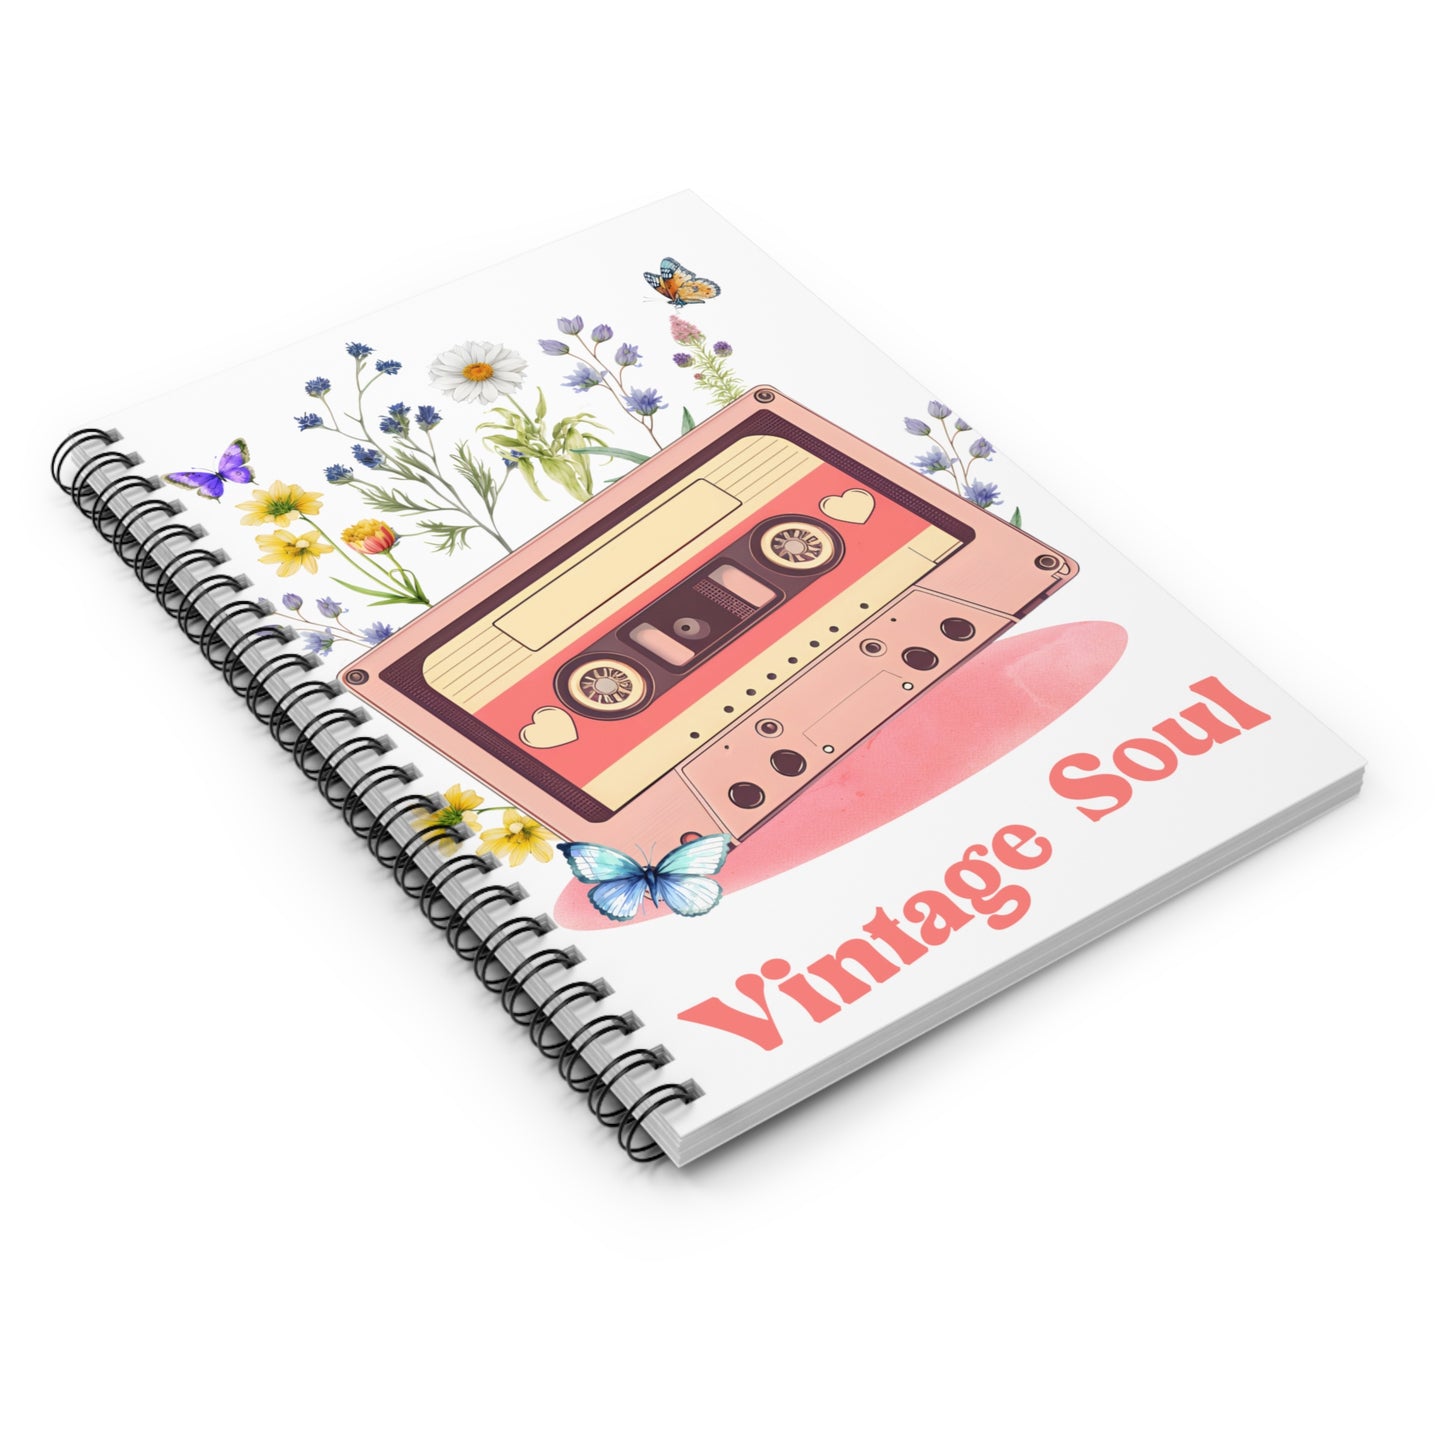 Vintage Soul: Spiral Notebook - Log Books - Journals - Diaries - and More Custom Printed by TheGlassyLass.com